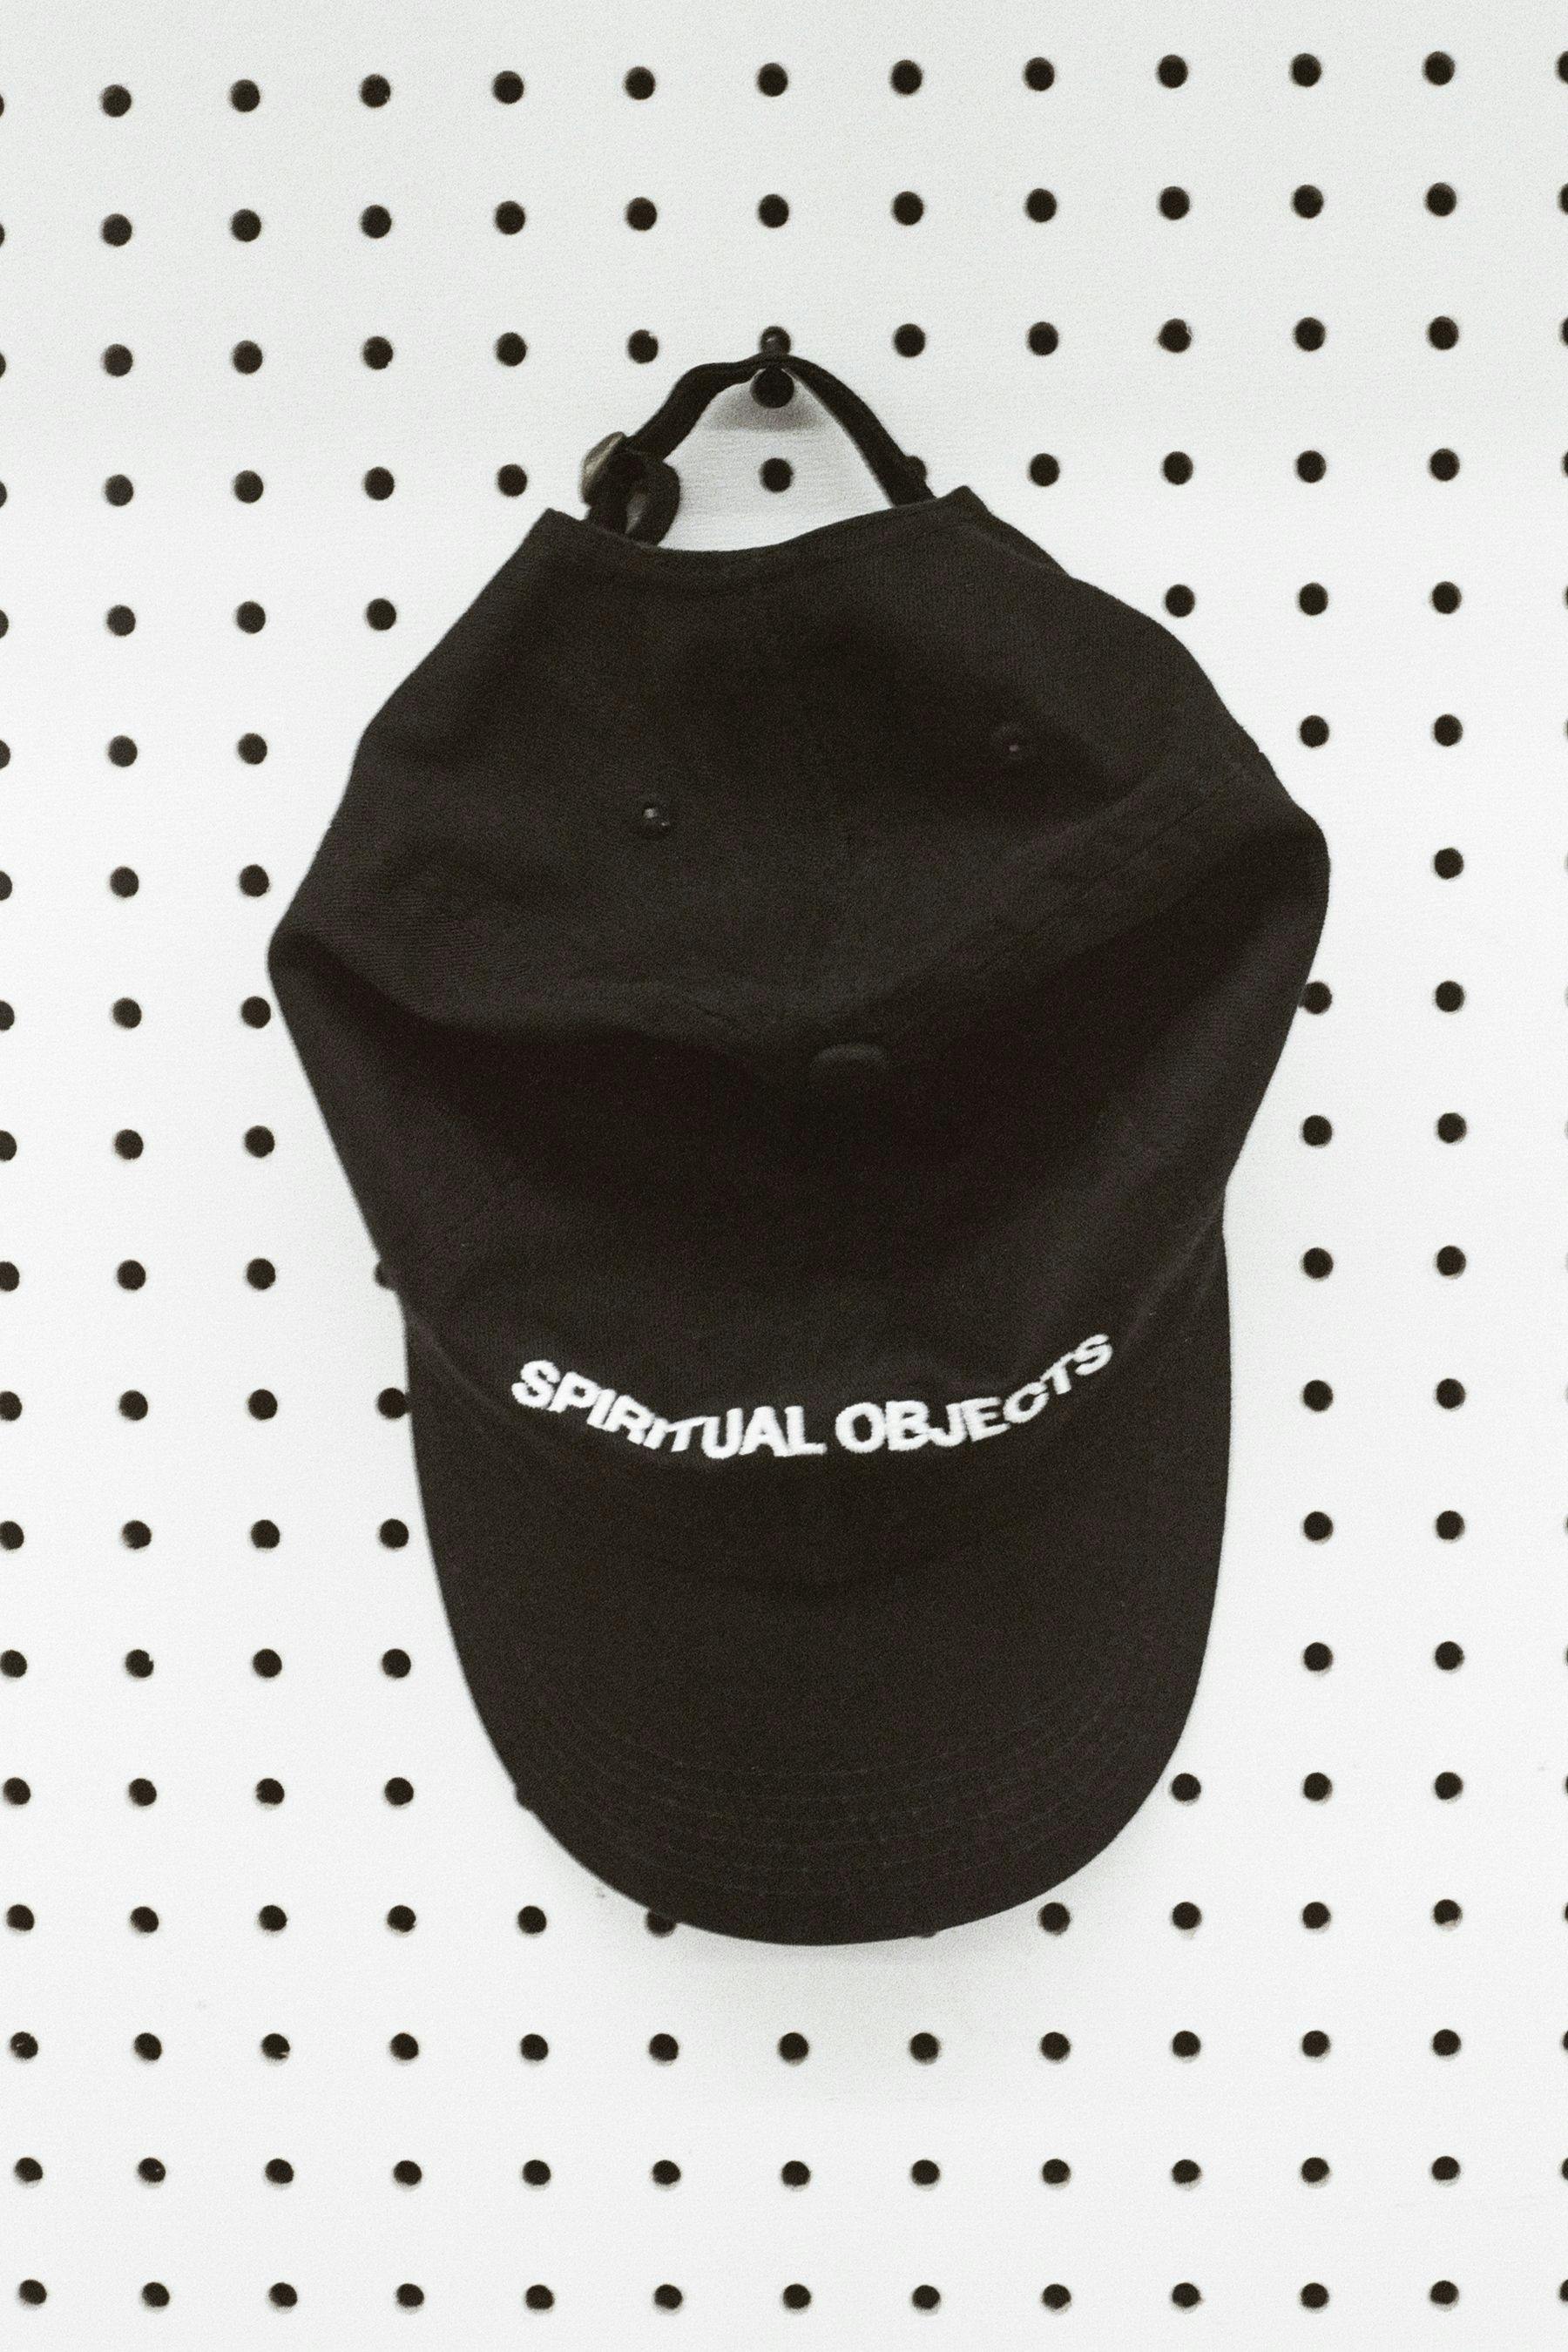 Main image for Spiritual Objects Studio Hat